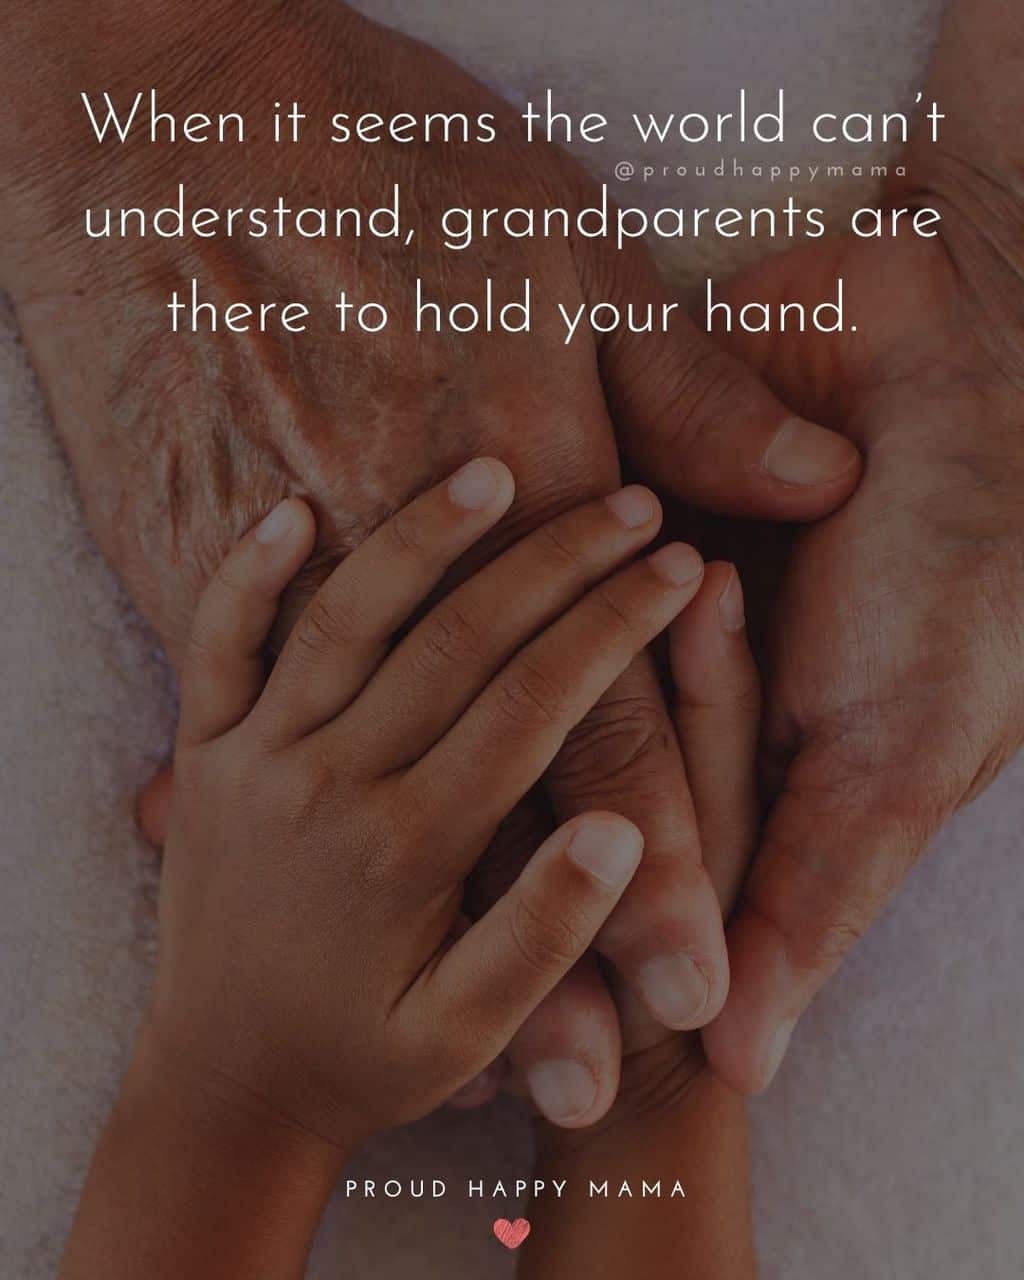 Grandparent Quotes – When it seems the world can’t understand, grandparents are there to hold your hand.’